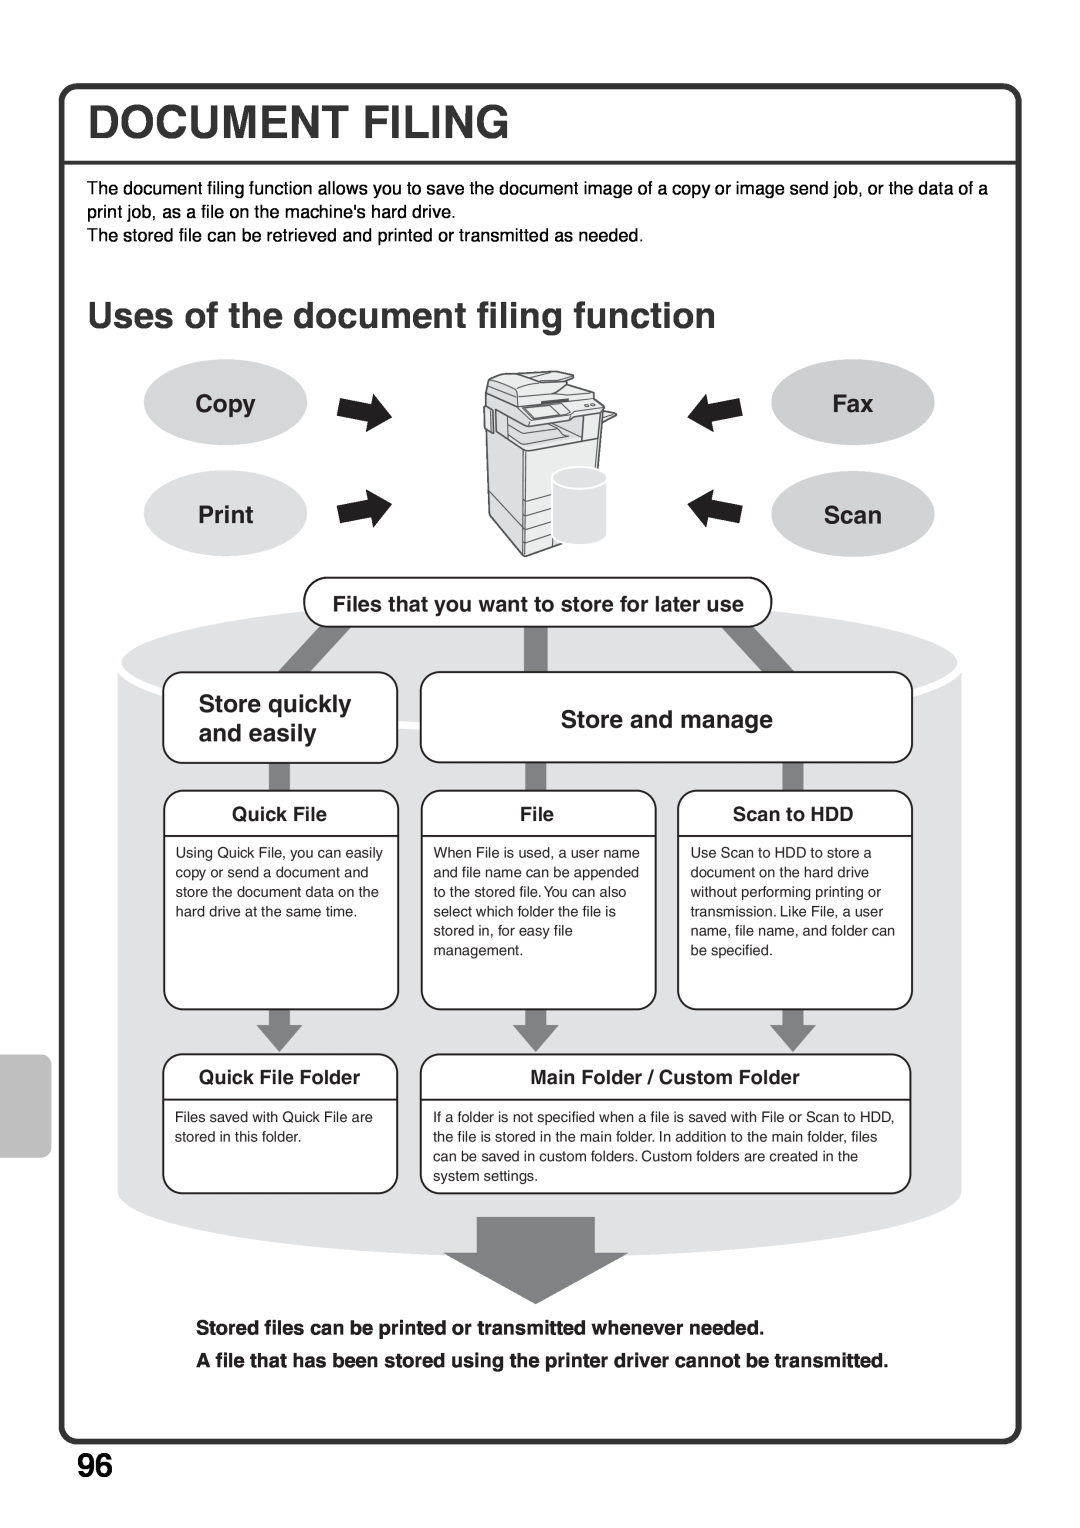 Sharp MX-4101N Document Filing, Uses of the document filing function, Files that you want to store for later use, Copy 